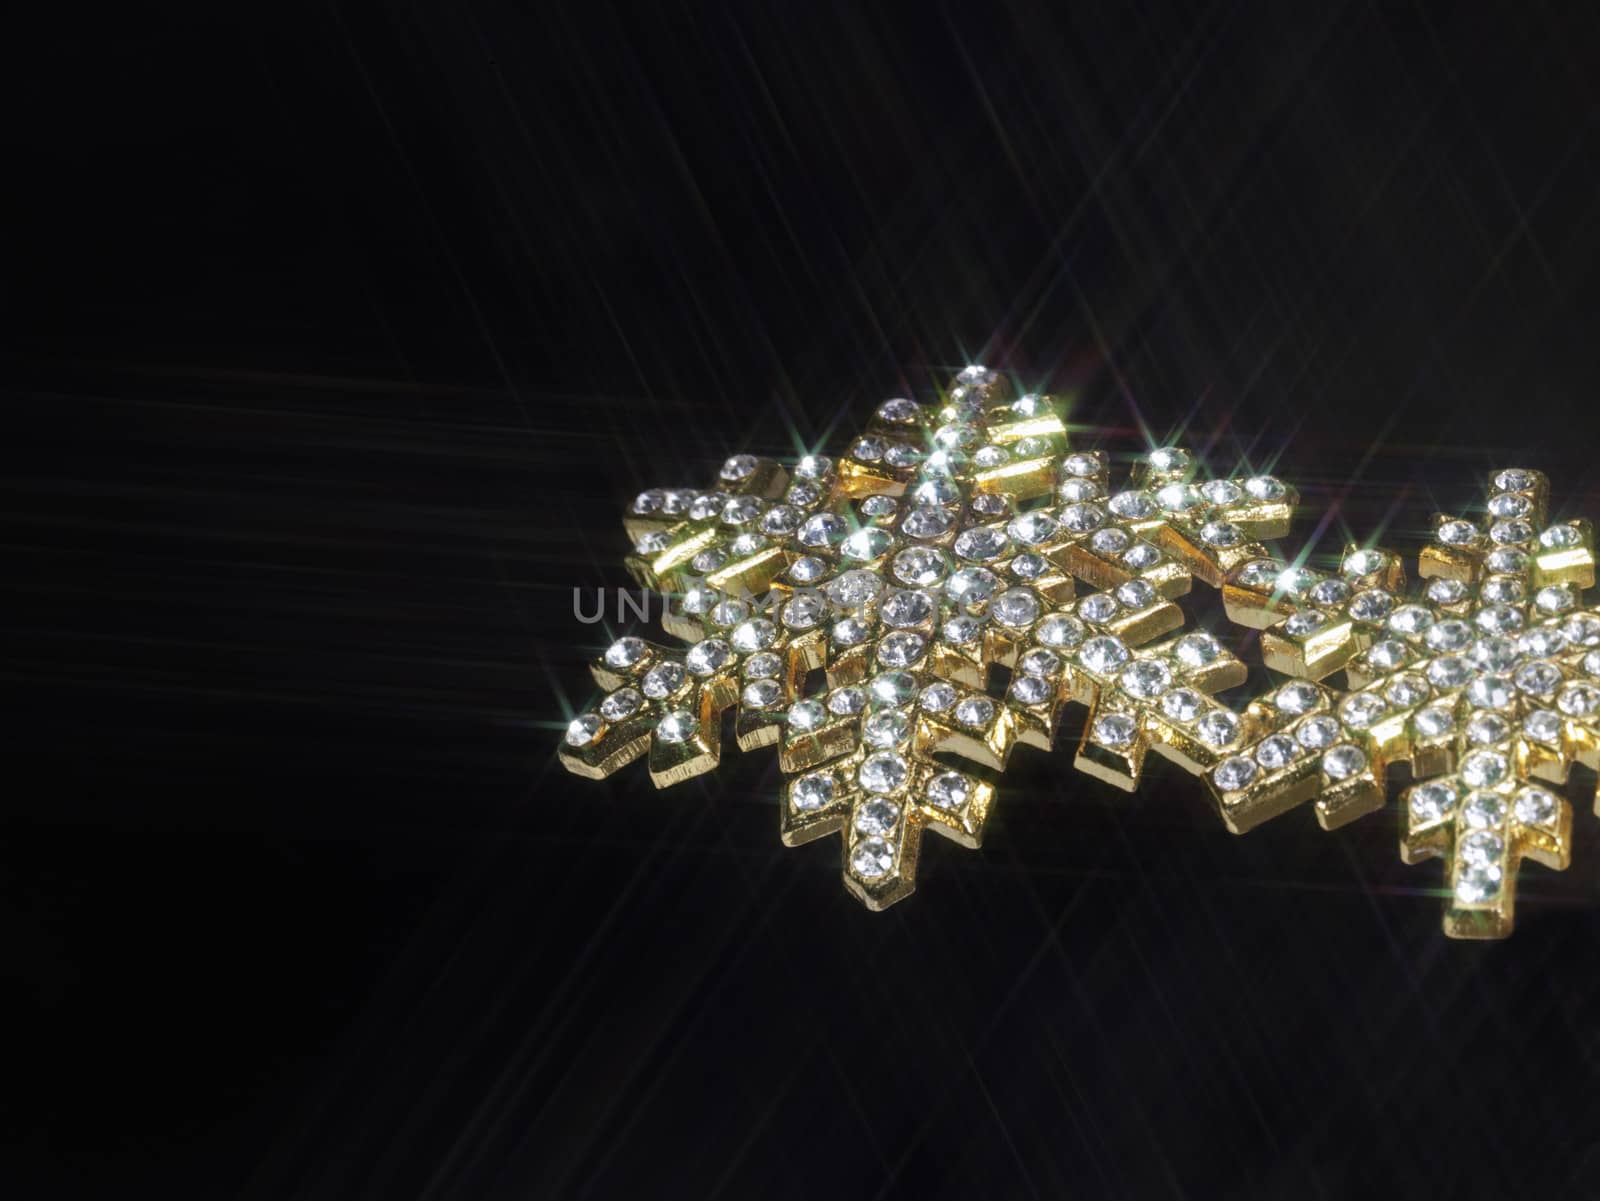 shiny jewelry in dark back, effective illuminated with a optical star-filter